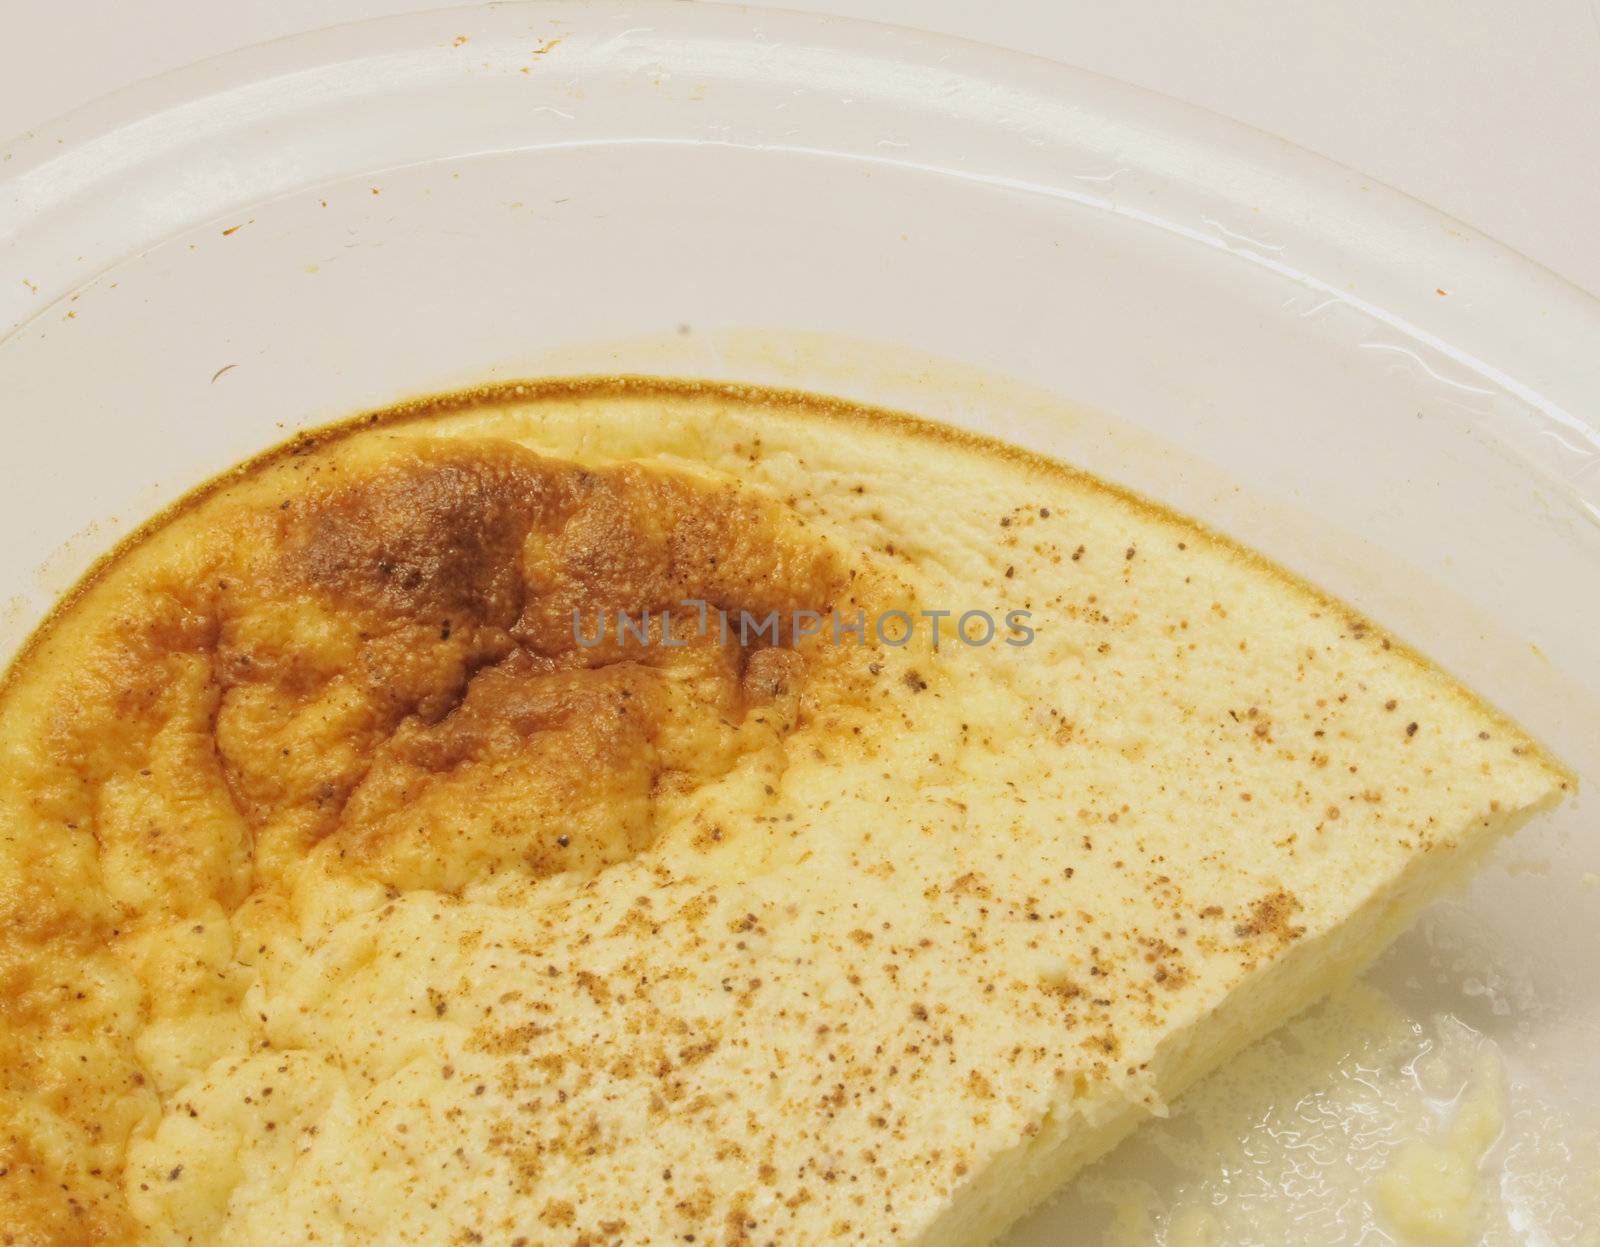 egg custard in a glass dish over alight background